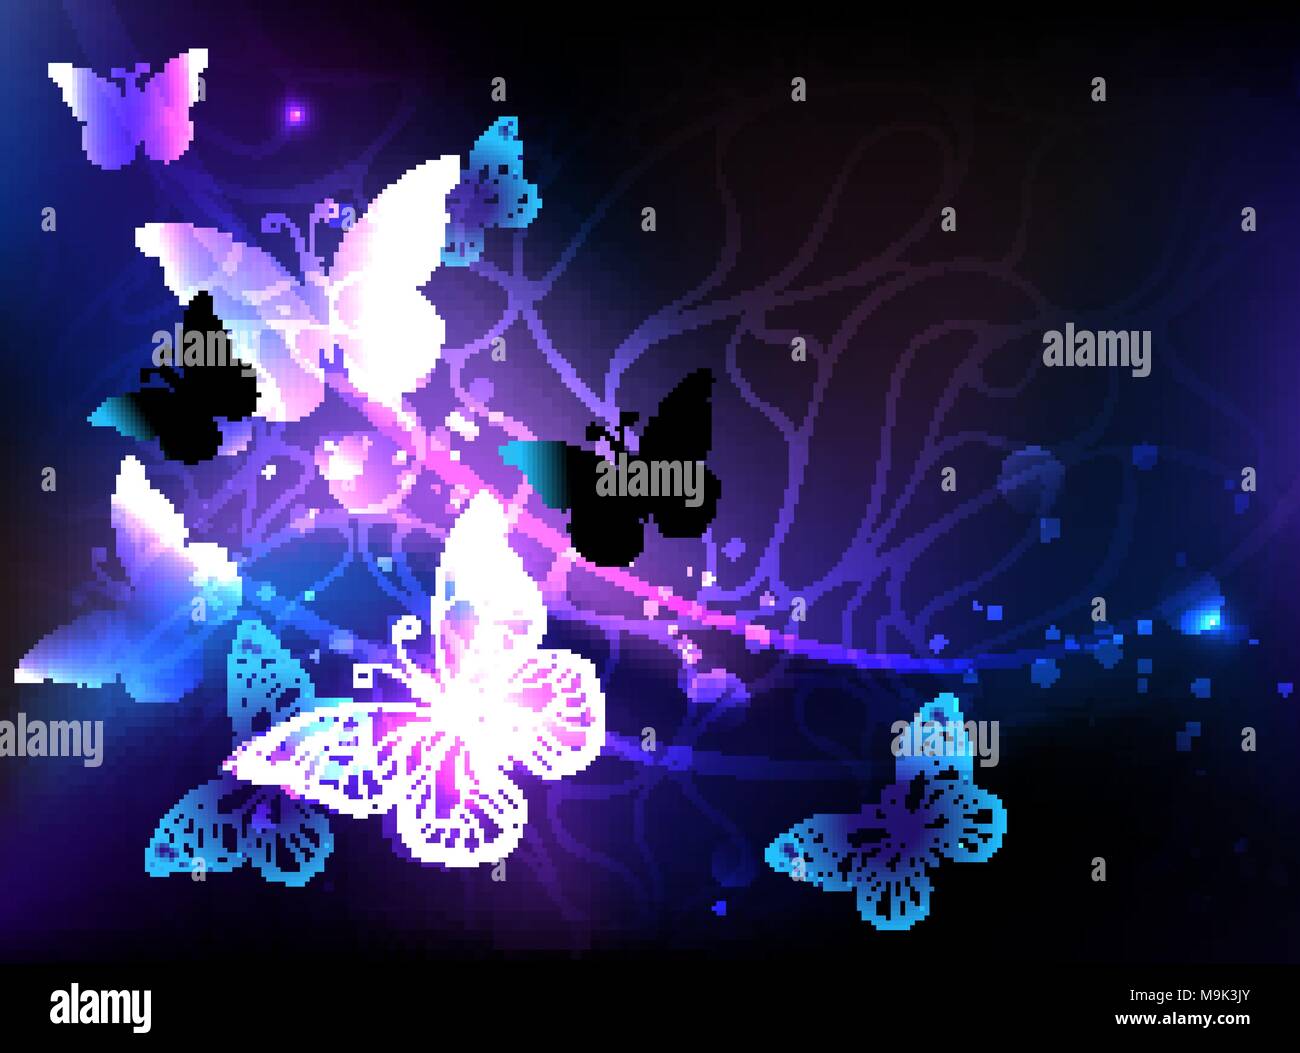 Black background with glowing night butterflies. Night butterflies. Design with butterflies. Stock Vector